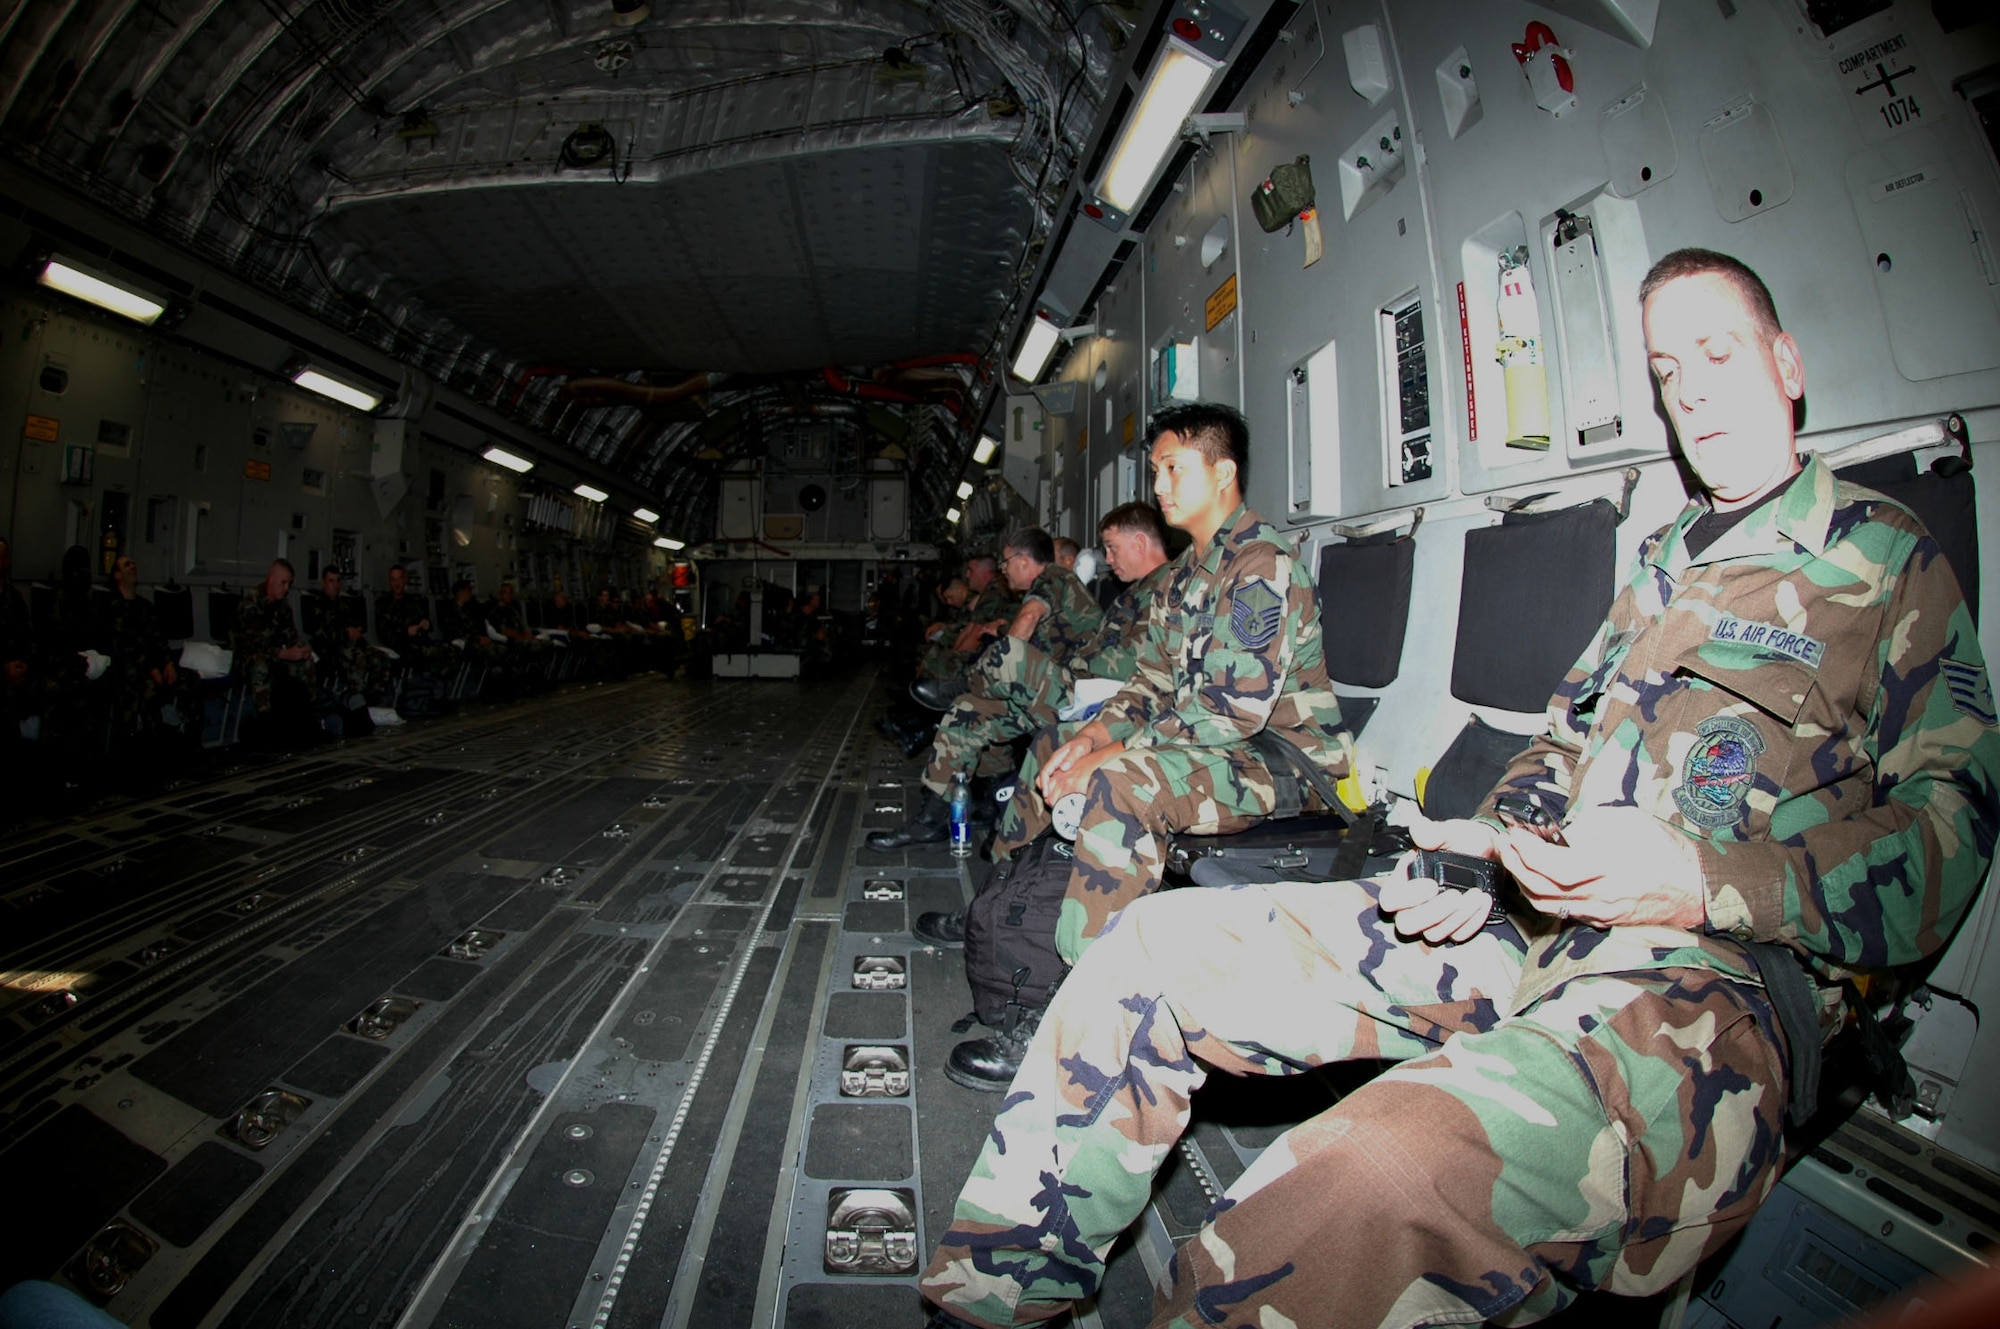 CE MEMBERS DEPLOY FOR SILVER FLAG -- Members of the 439th Civil Engineering Squadron sit aboard a C-17 Globemaster III Oct. 6 at Westover for a flight to Dobbins Air Reserve Base, Ga. The reservists are participating in Silver Flag, one of the largest Air Force exercises in the United States. More than 50 reservists from Westover are involved. The second week of the exercise takes place at Tyndall Air Force Base, Fla.